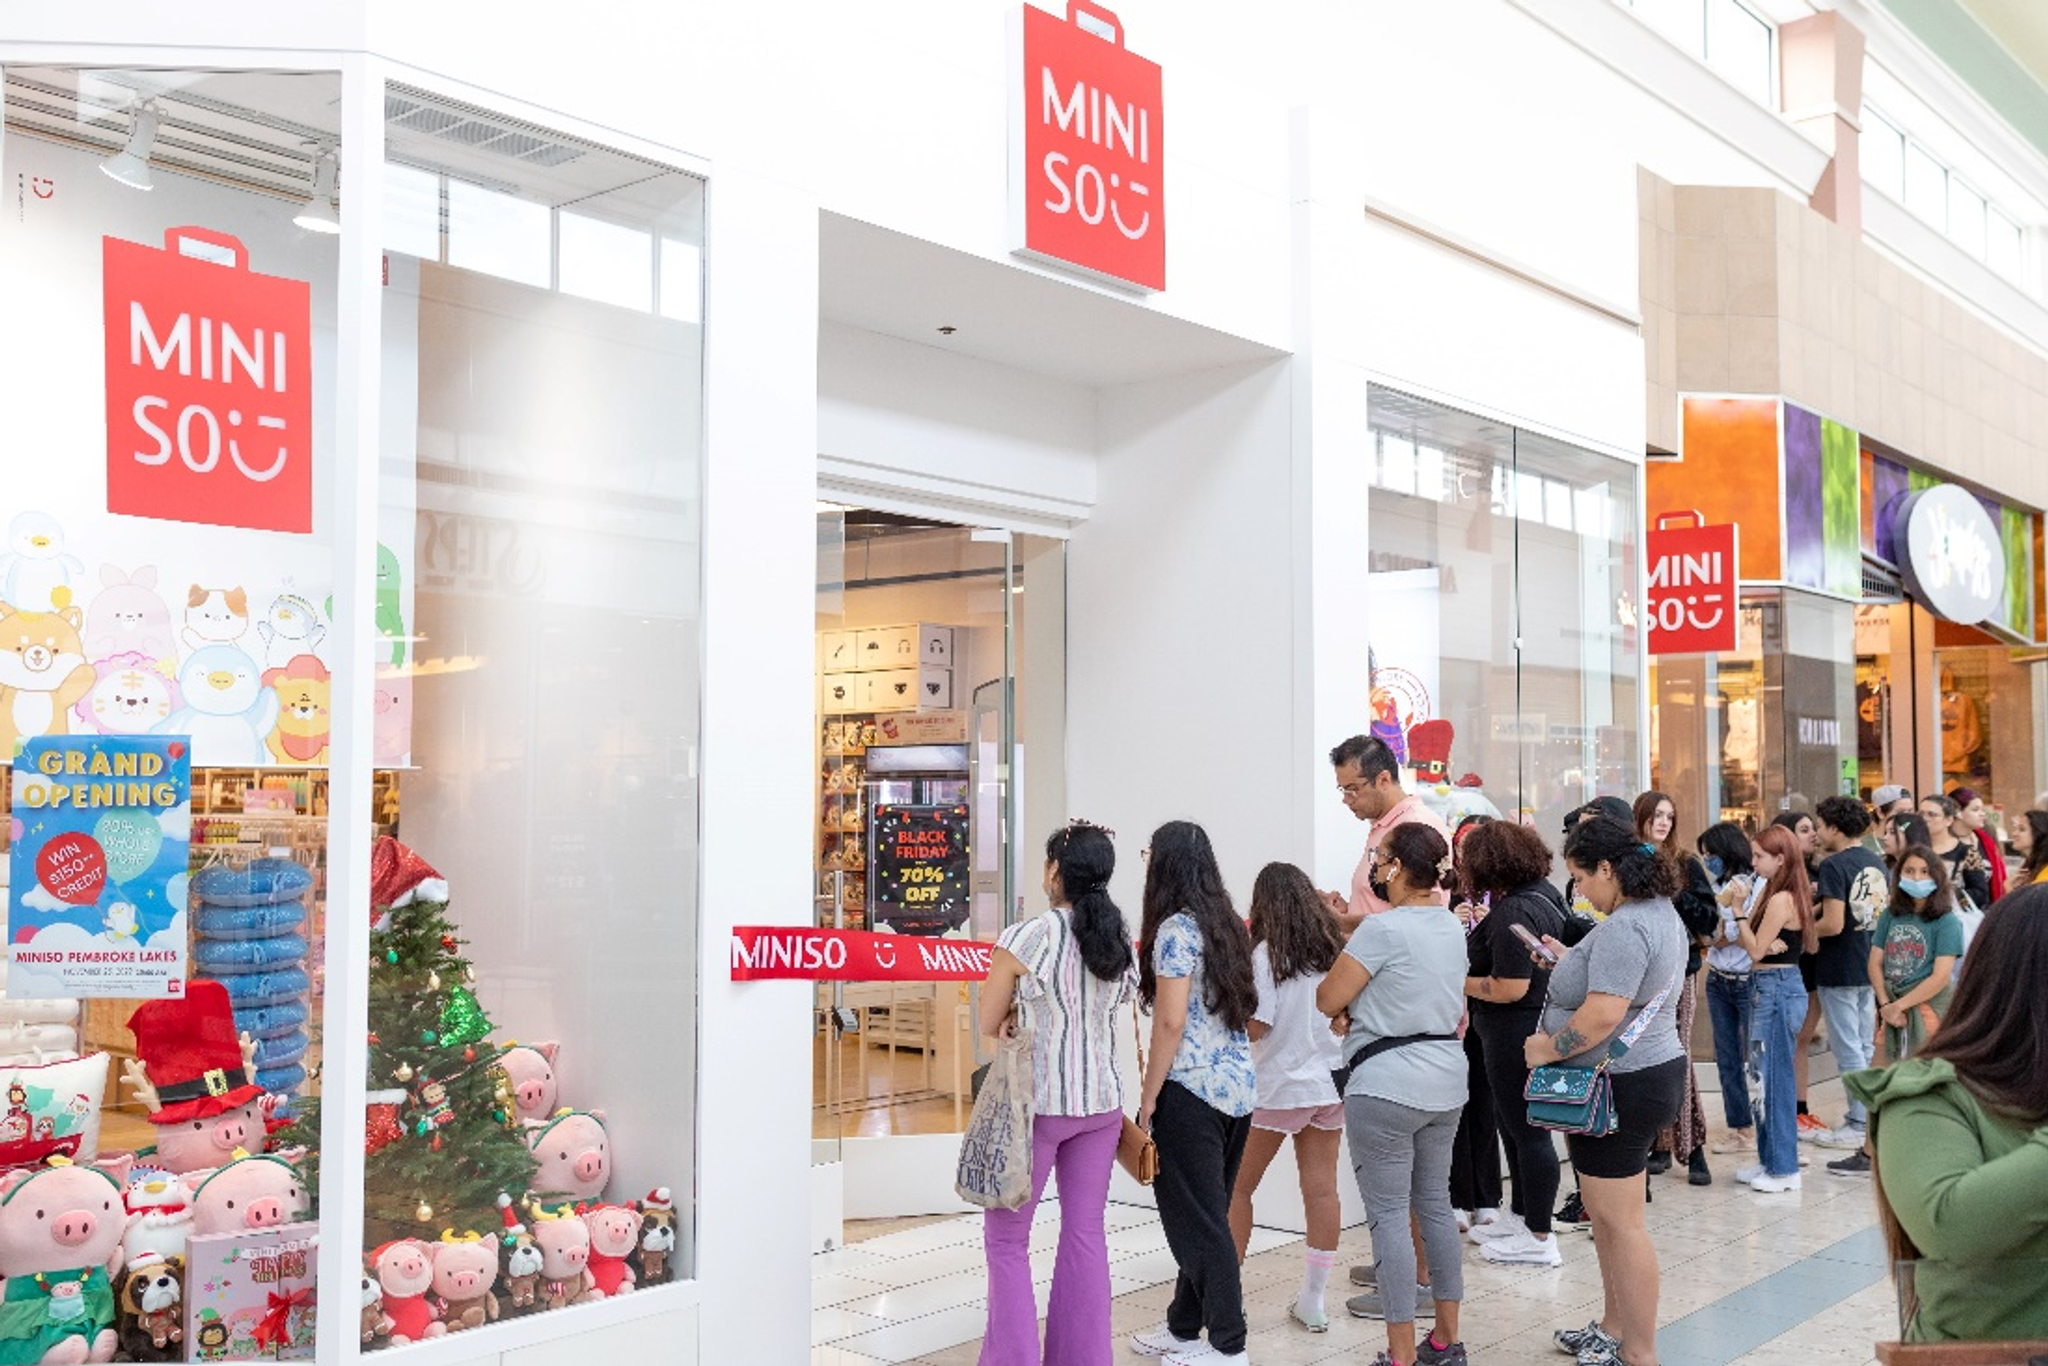 Why MINISO spreads the ‘kidult’ lifestyle in global retail